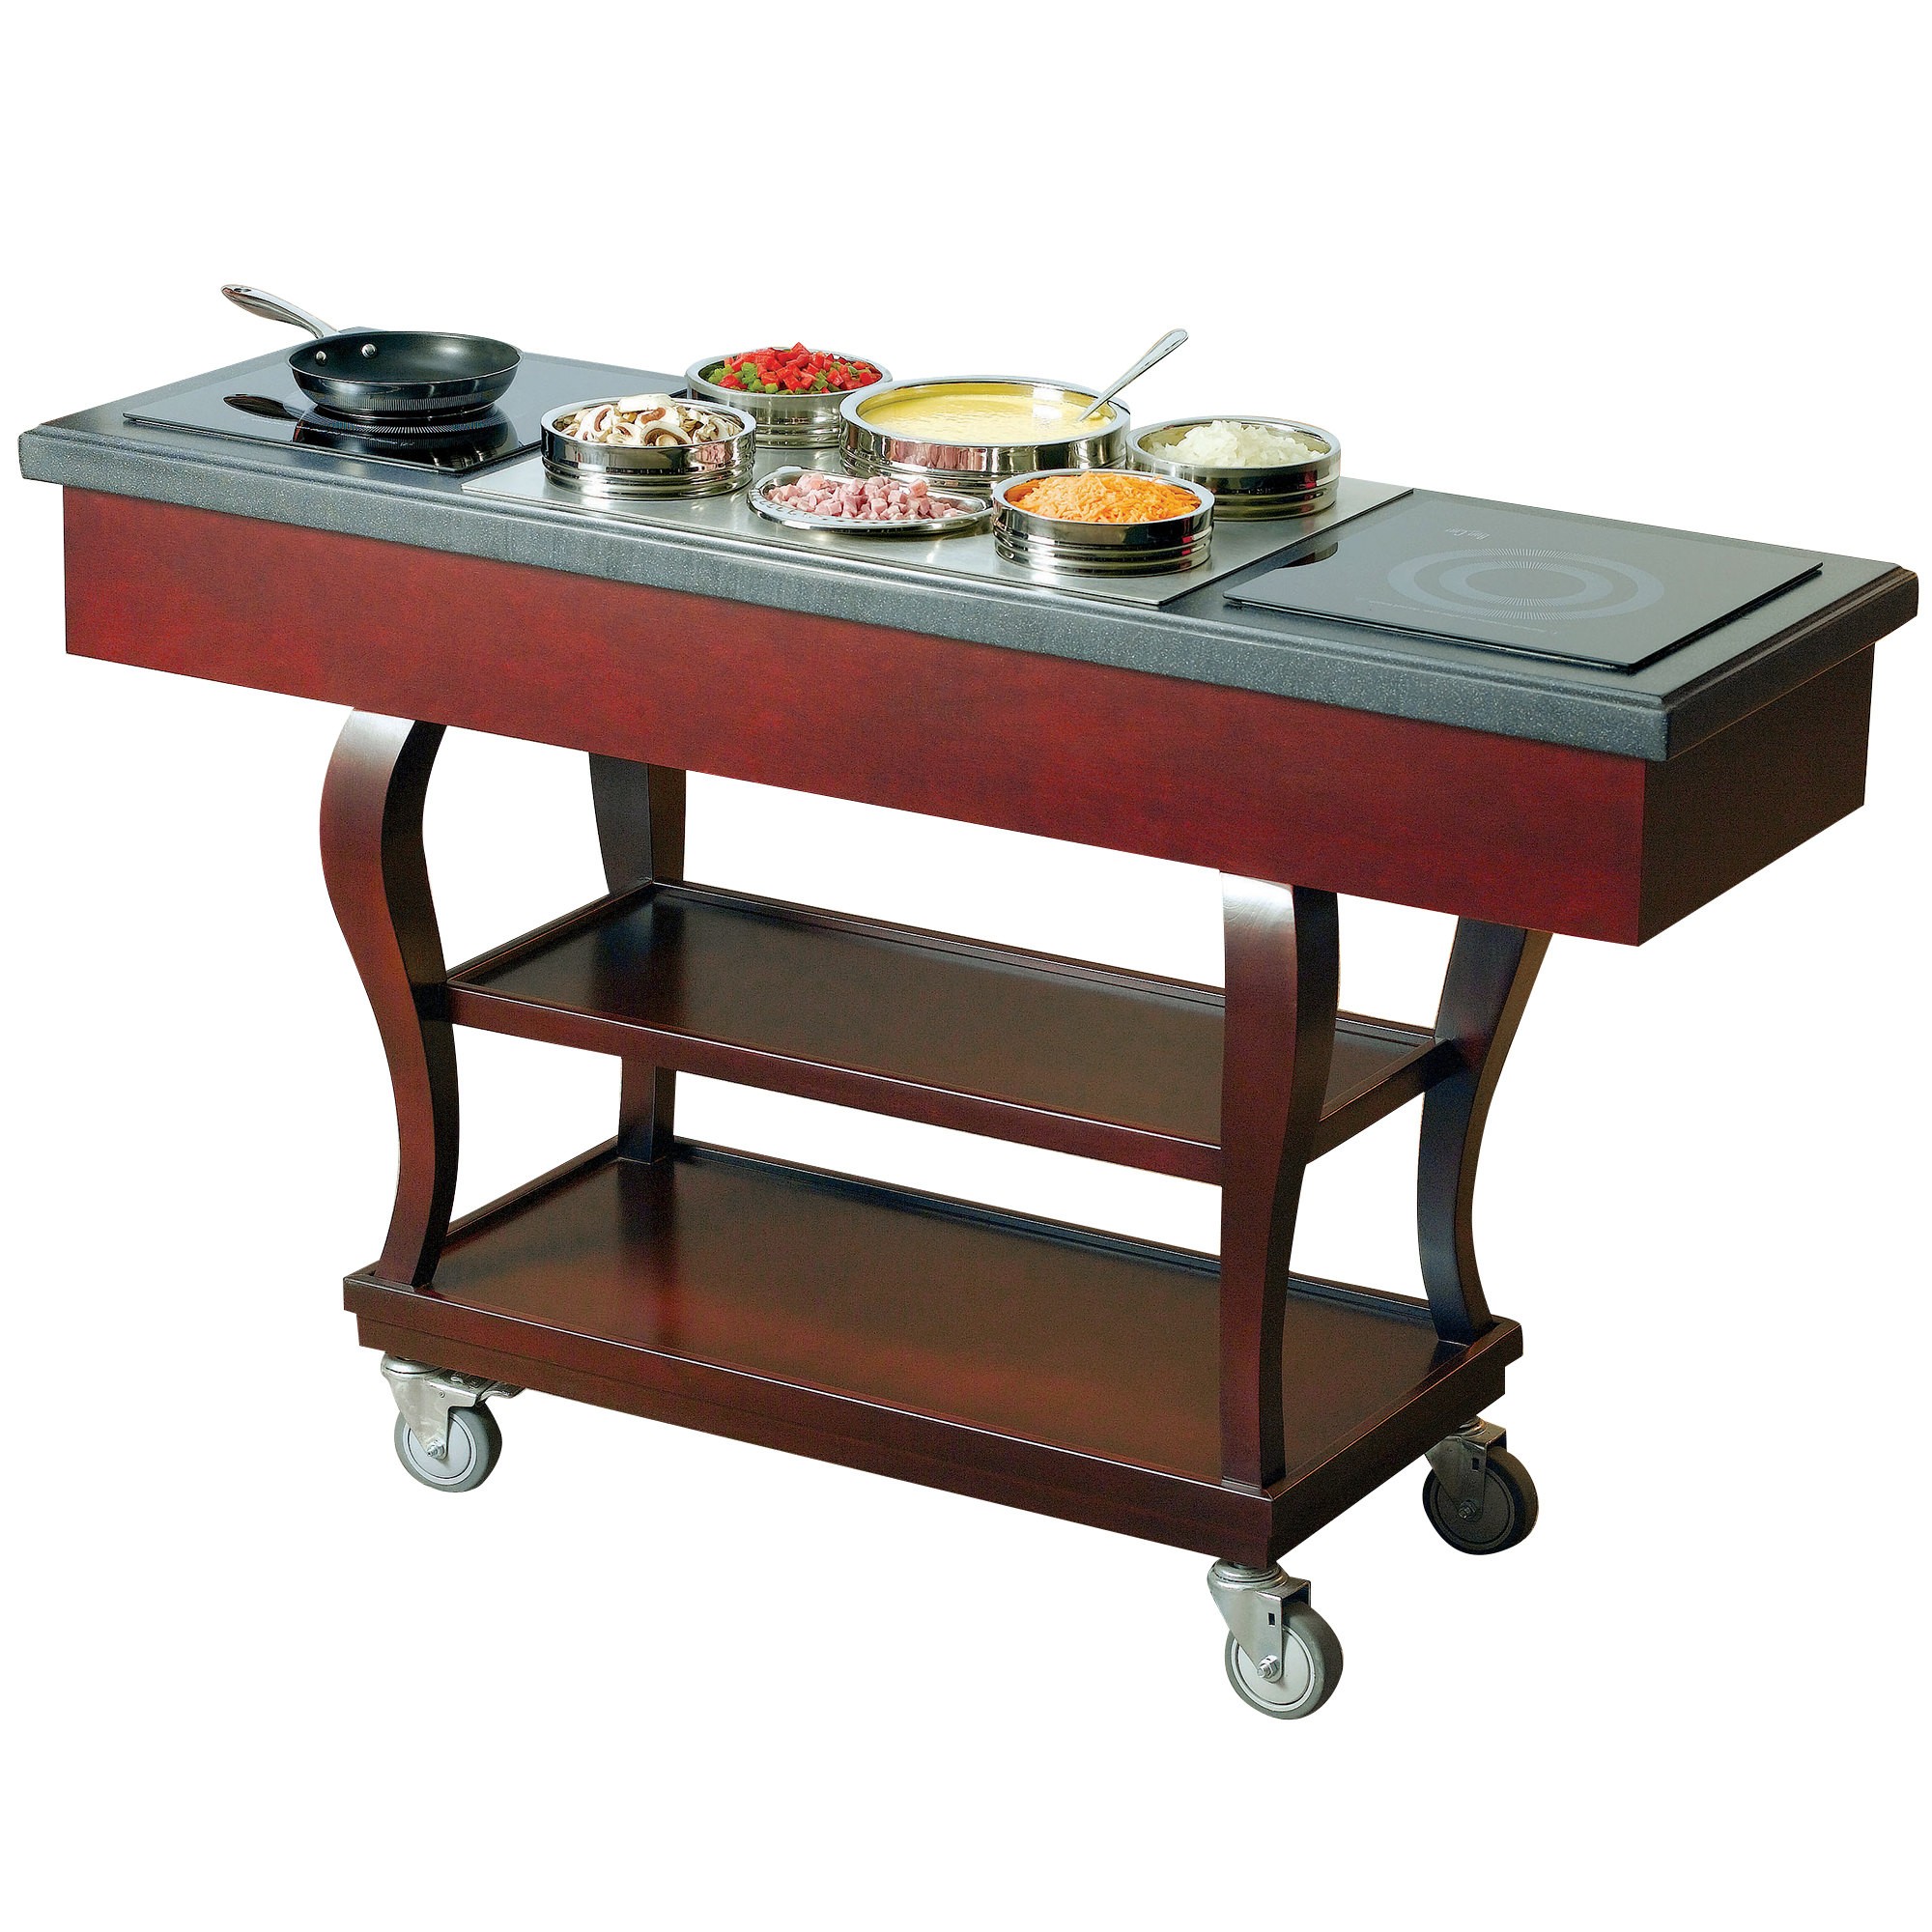 Bon Chef 50064 Traditional Induction Range Cart with 2 110V Stoves, 62" x 20" x 37"